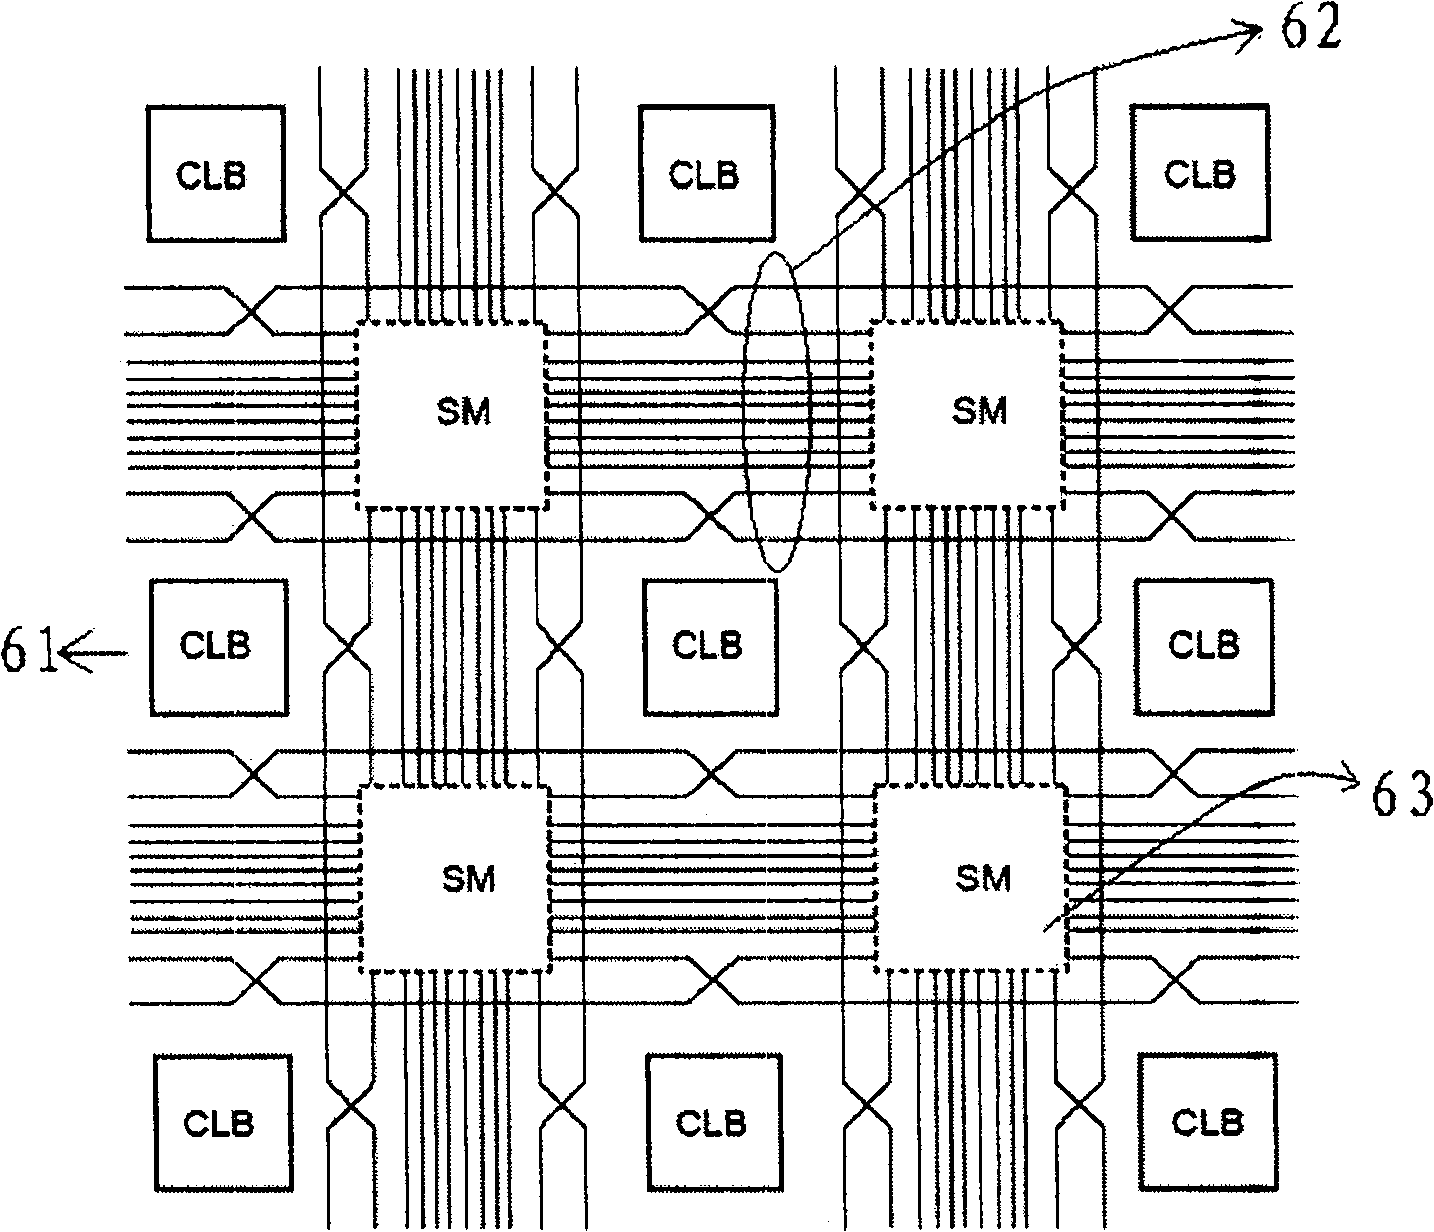 Testing method capable of configuring FPGA configurable logic block with five times